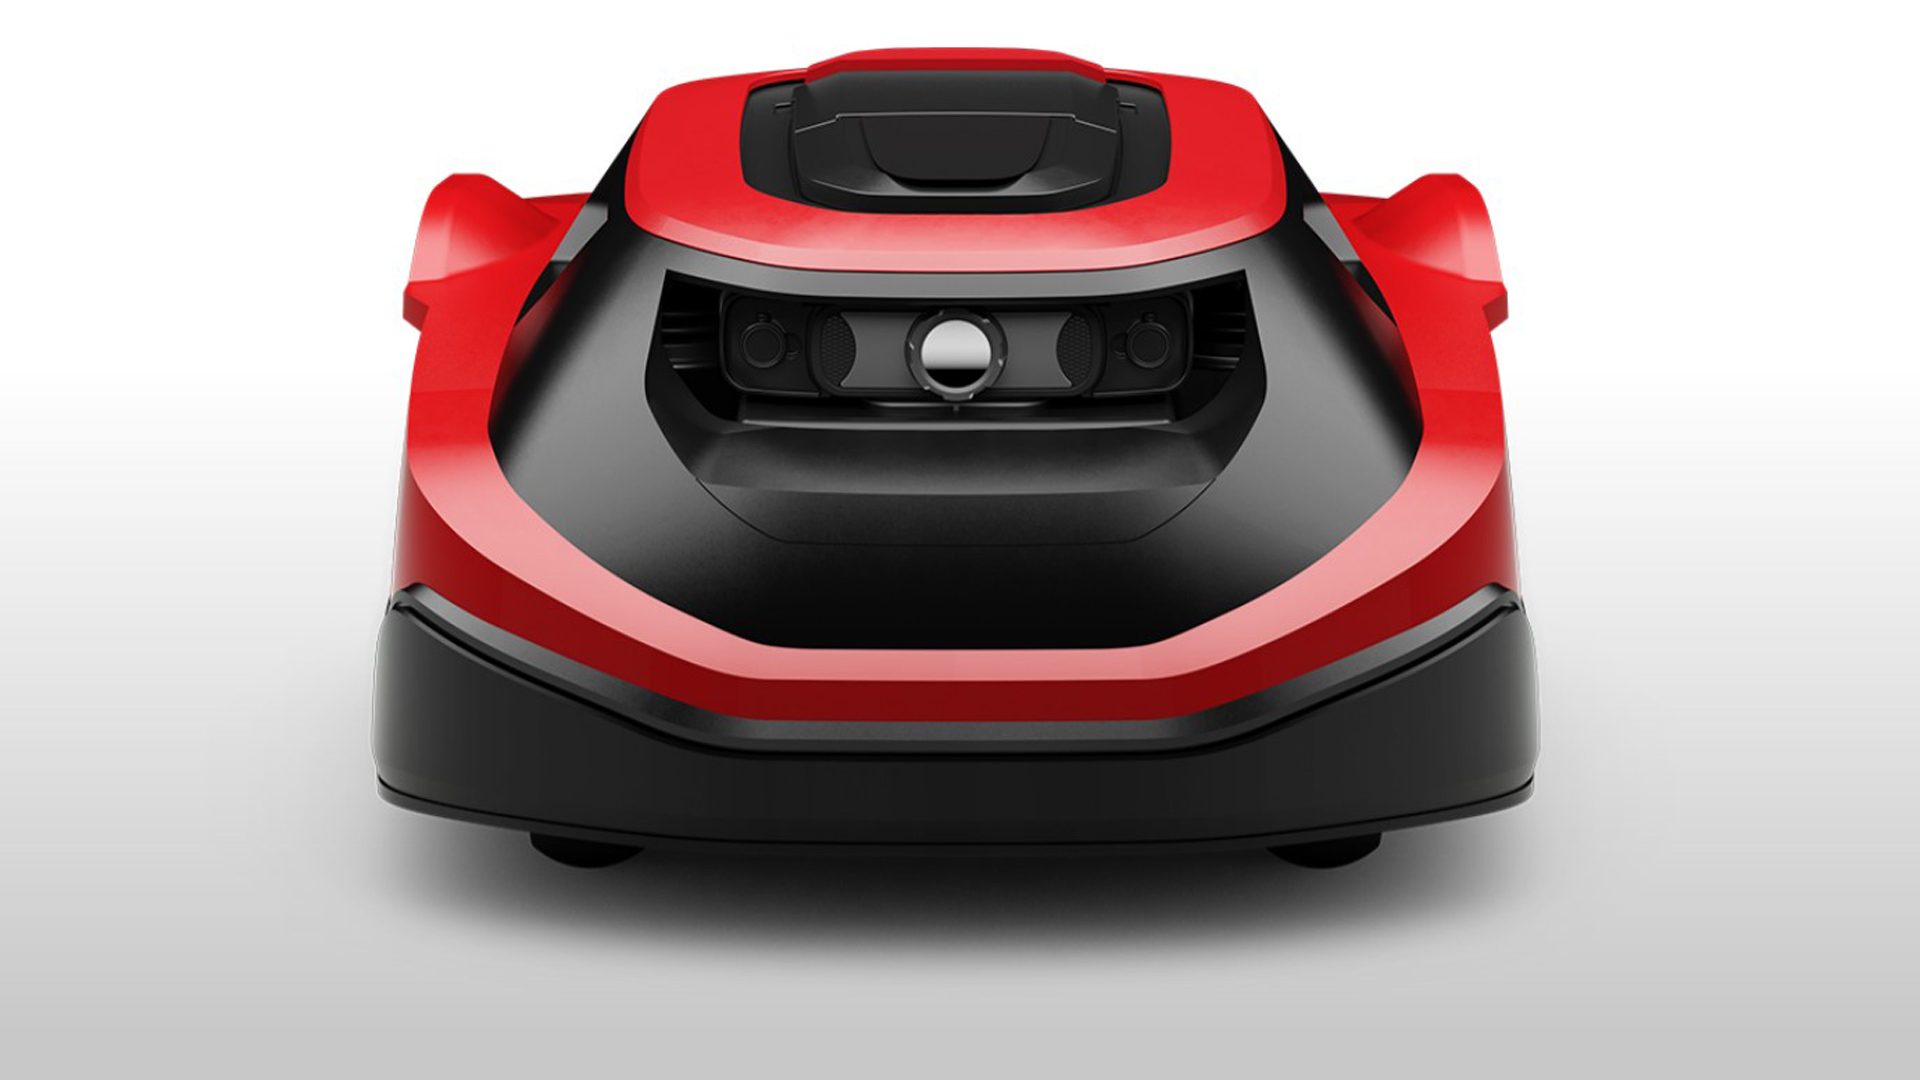 Toro’s robotic garden mower makes use of a number of cameras to navigate your yards